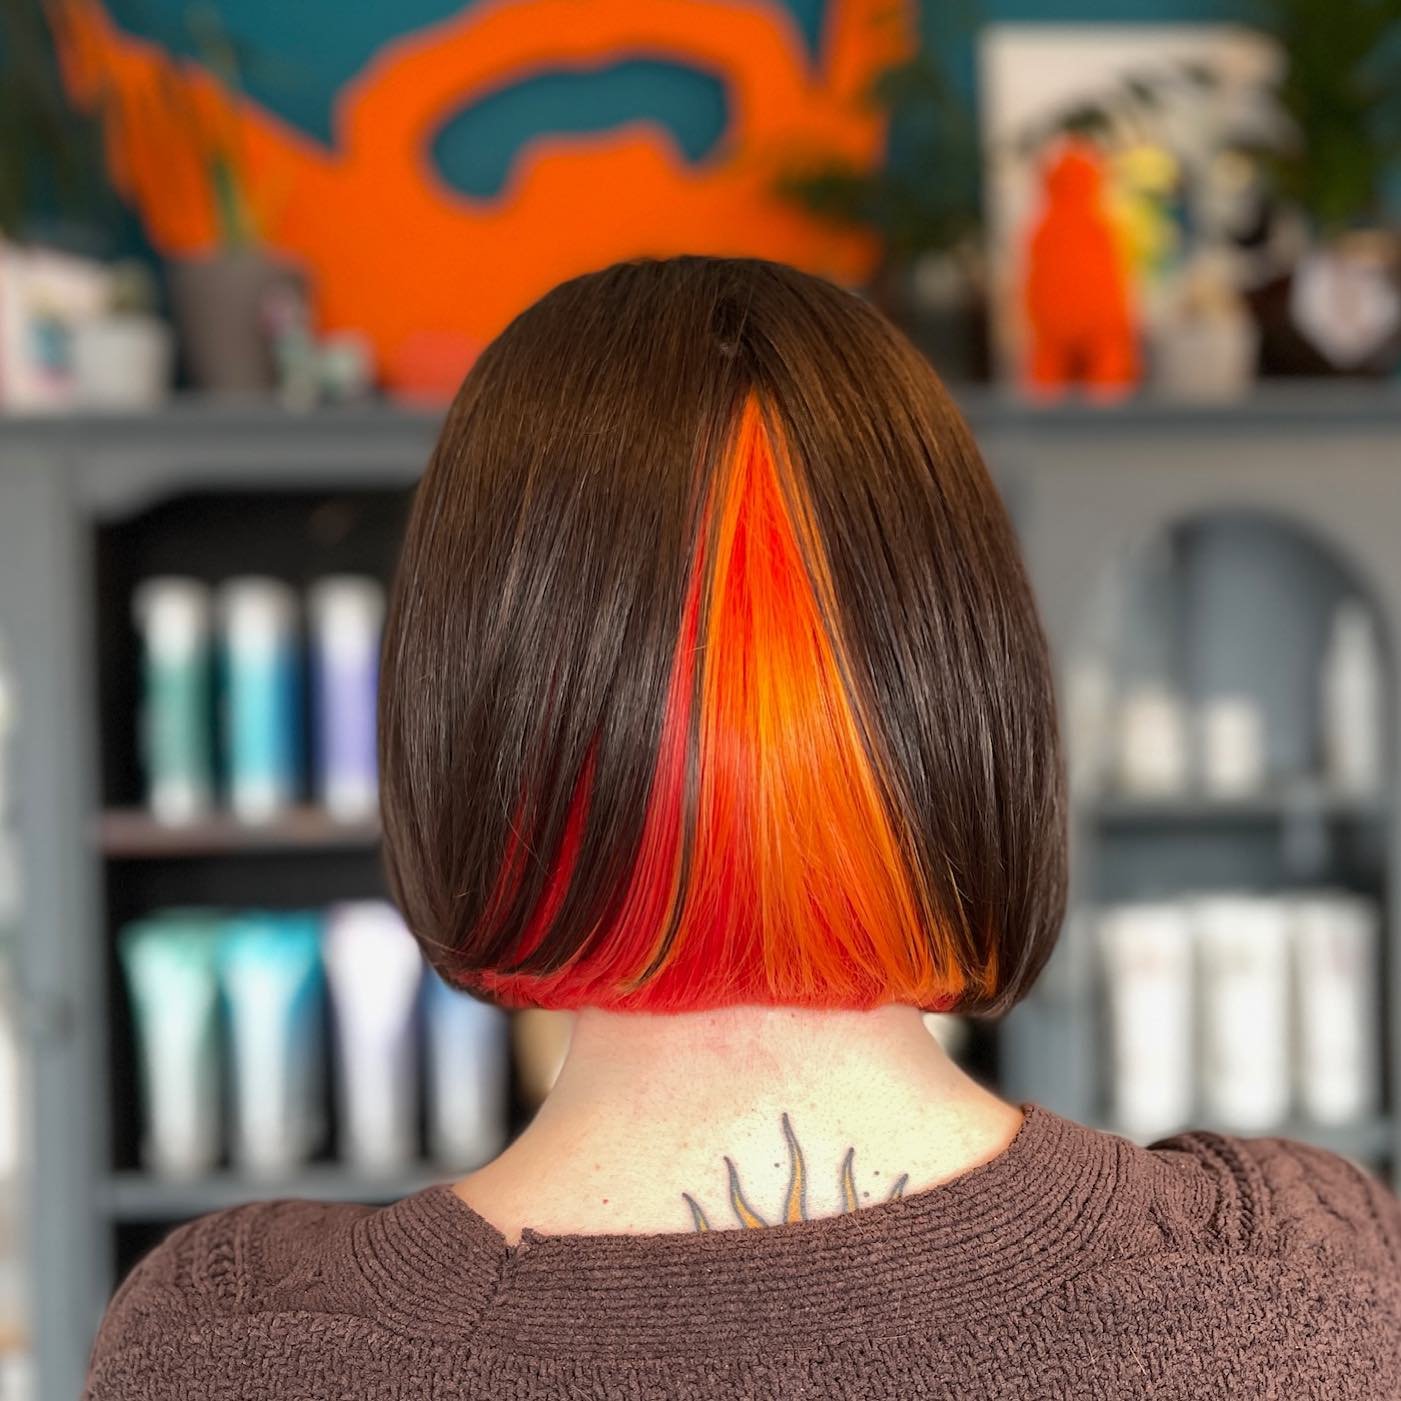 The darkness is finally breaking and summer colours coming to the light. Check out this stunning reveal made by our @ashhairobsession and @mikehairbristol ✨💐👀

#bs3 #hairobsessed #hairgoals #bristolhair #bedminster #bestofbristol #hairideas #vividh